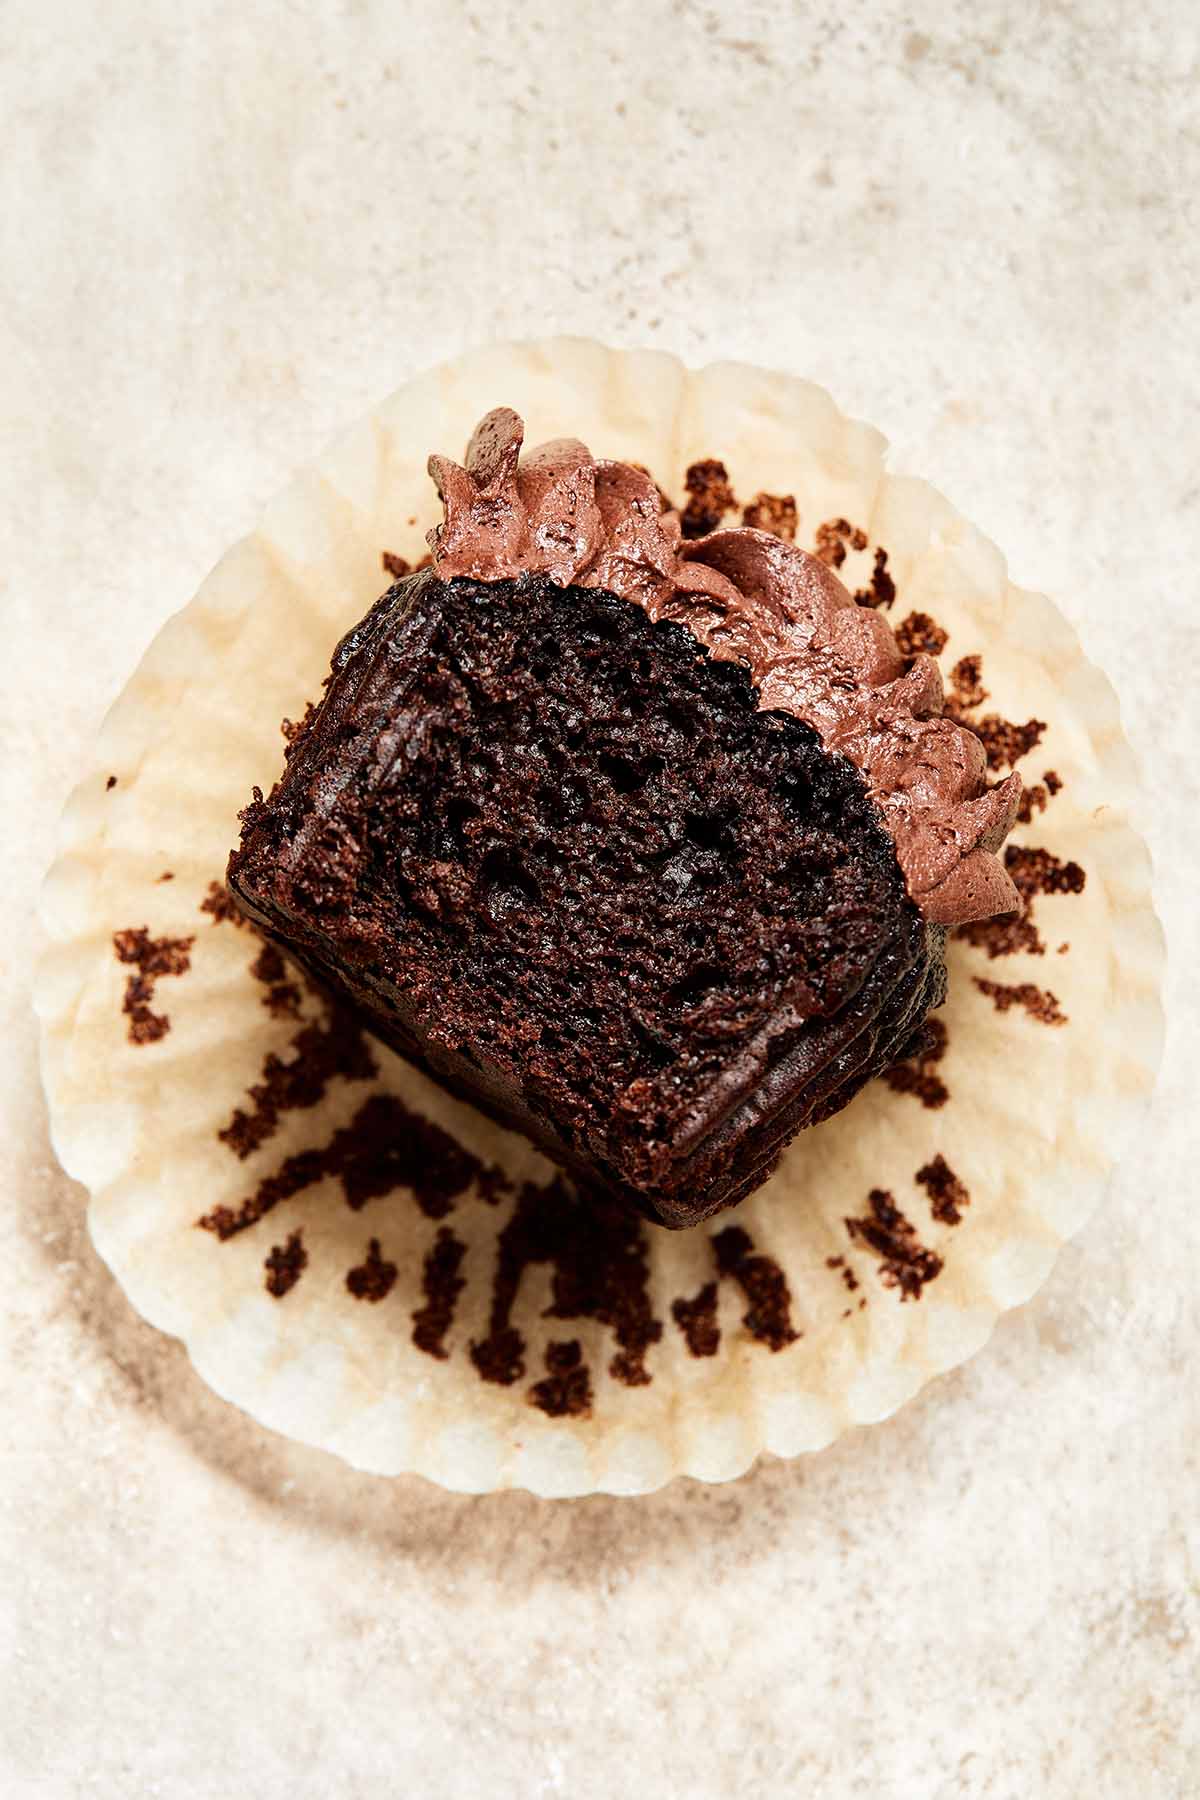 Chocolate cupcake on a cupcake wrapper with a bite taken out of it.